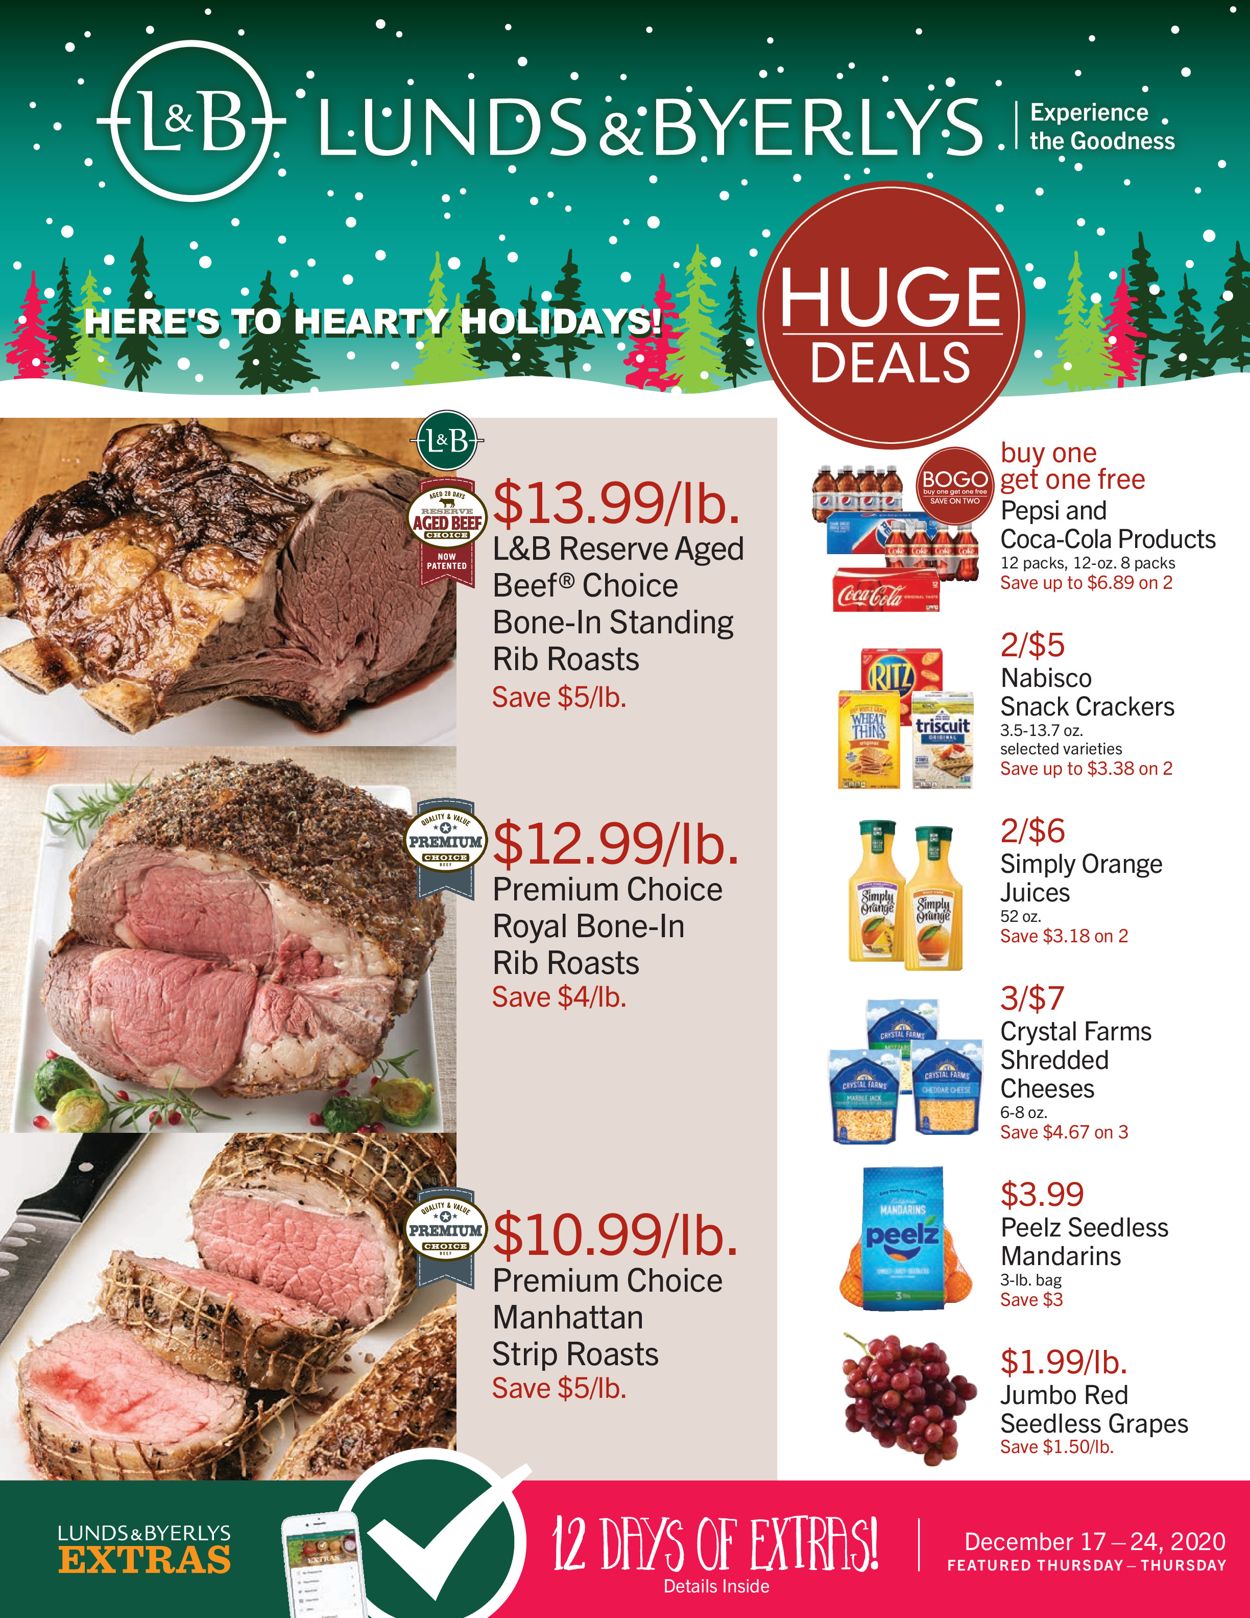 Lunds & Byerlys Huge Deals Weekly Ad Circular - valid 12/17-12/24/2020